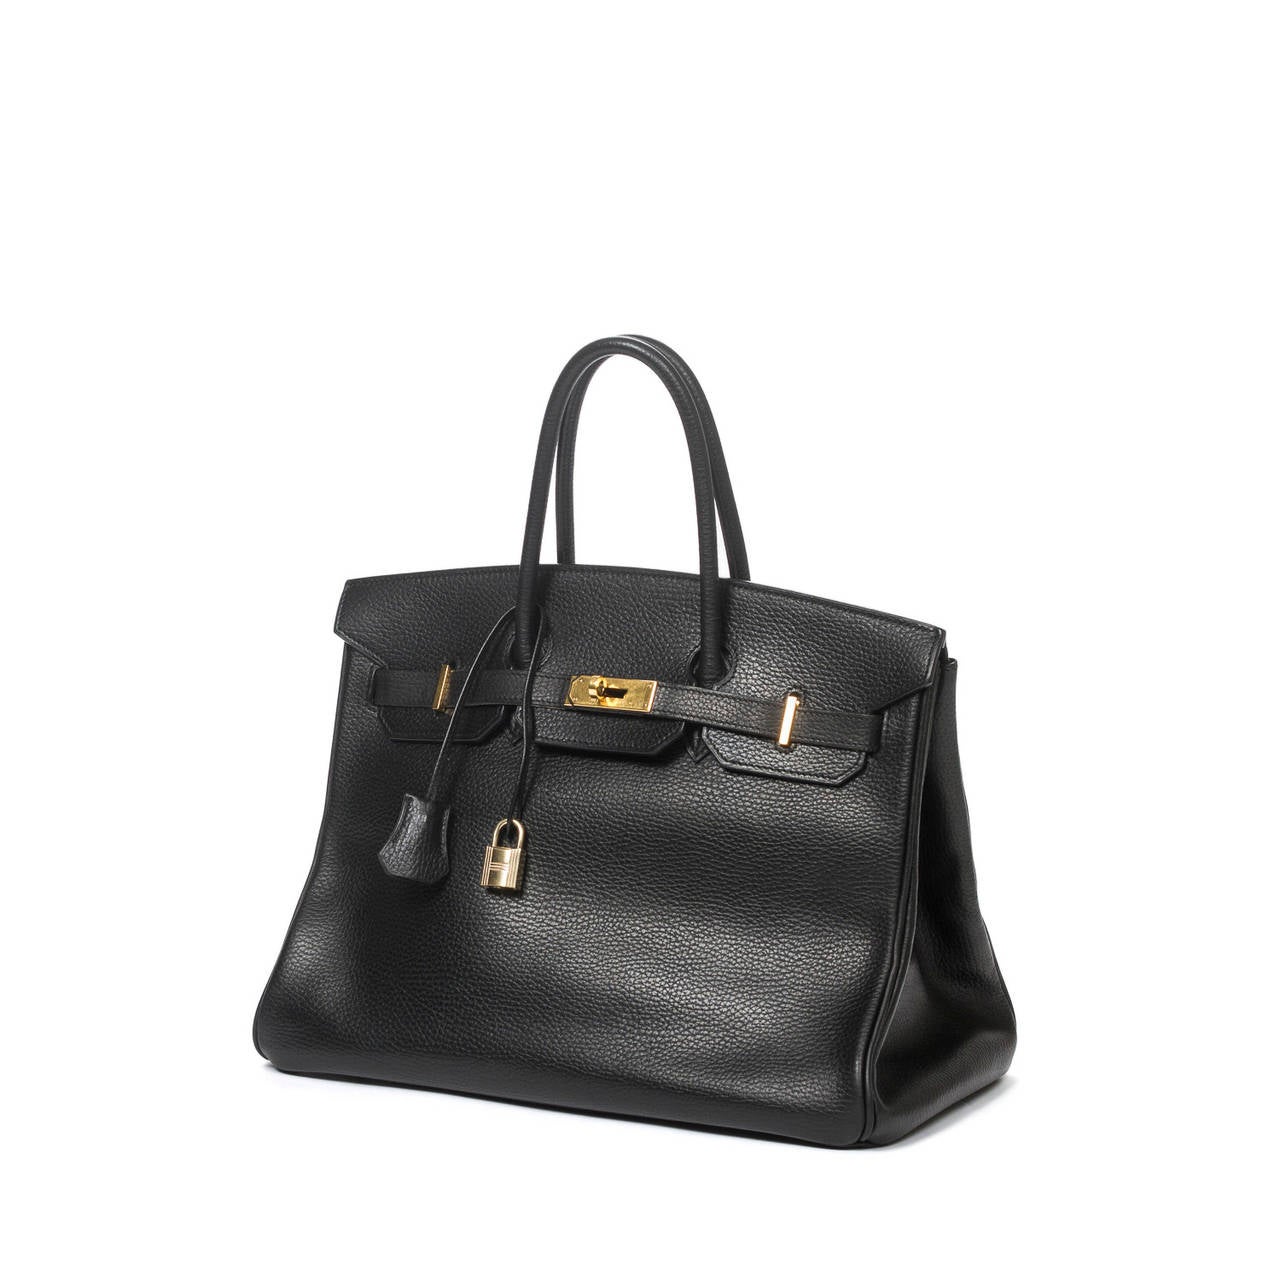 Birkin 35 in black ardennes leather with gold tone hardware, cadenas and 2 keys in clochette. Stamp E in a square (2001). Dustbag included. Few Scuffs on the leather and on the hardware, excellent condition.